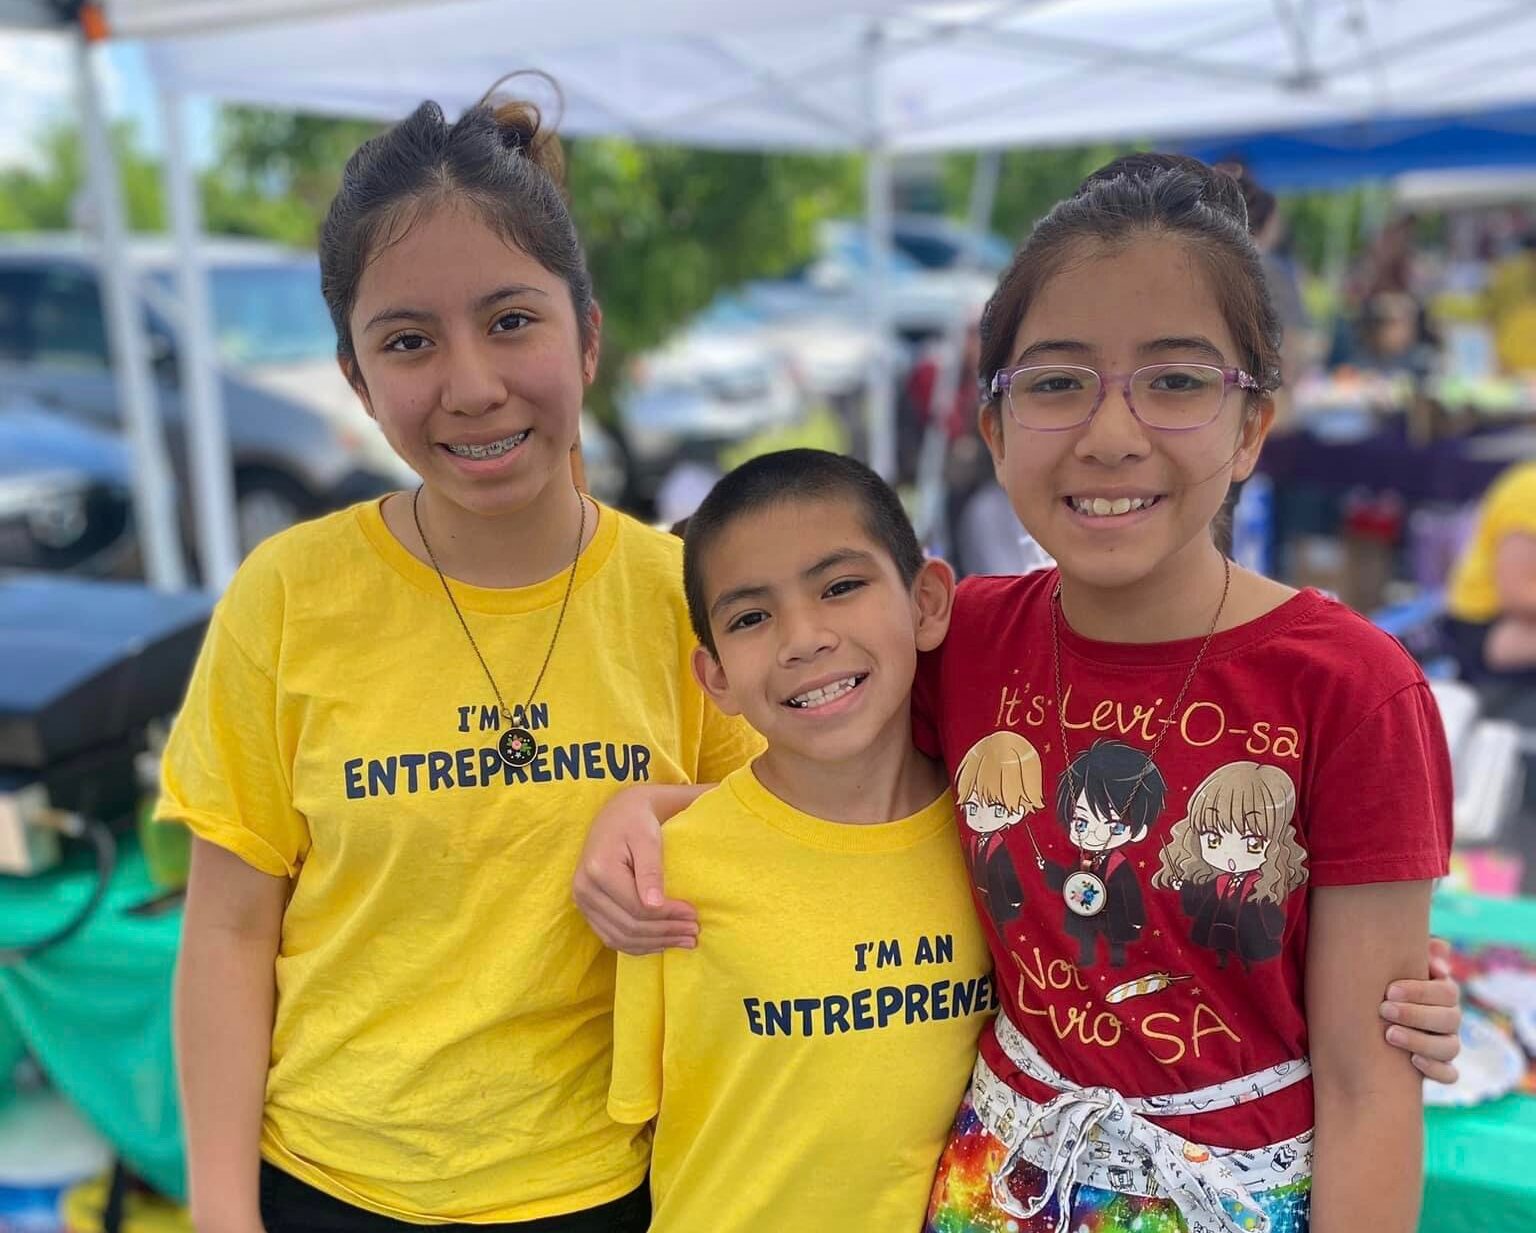 Meet Abigail 13, Isabella 11, Matthew 9 (siblings). They sell tacos, fruit cups, and dreamcatchers and have participated since 2019!